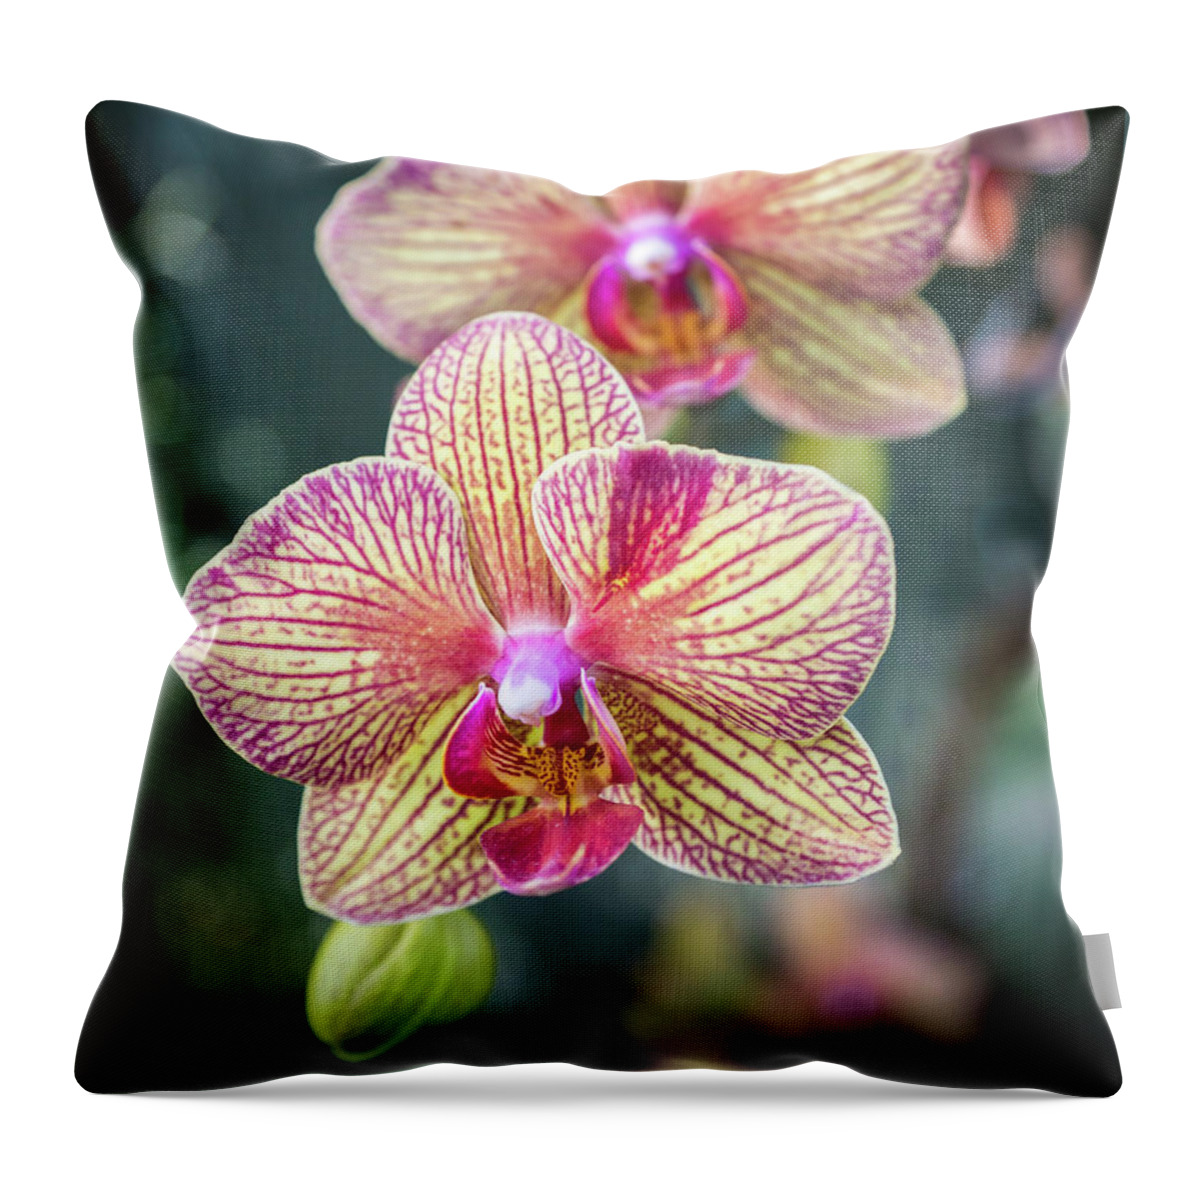 Orchid Throw Pillow featuring the photograph You're So Vain by Bill Pevlor